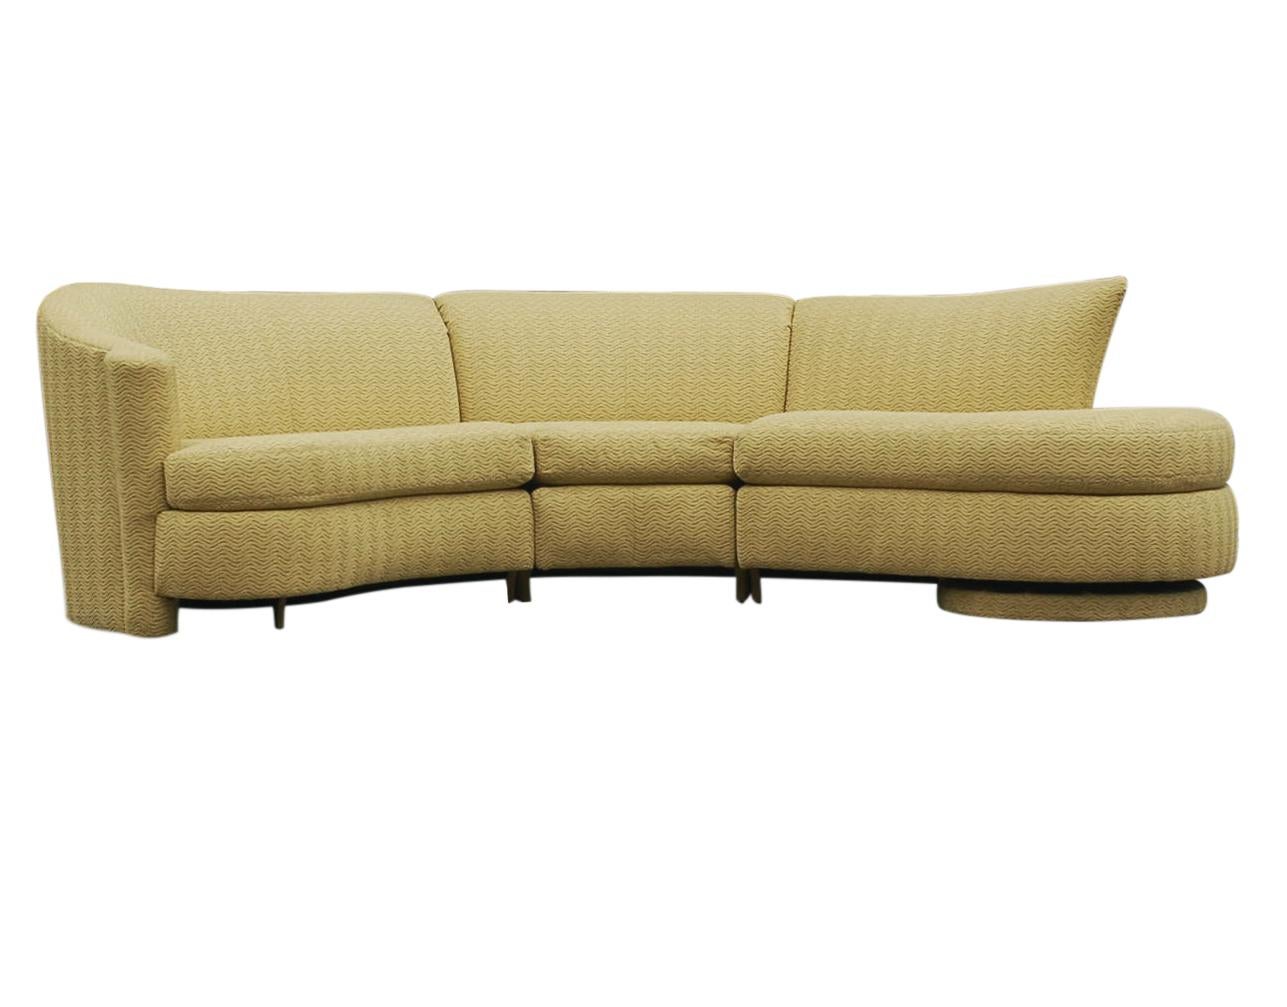 A sculptural vintage beauty from the 1970s. This 3 piece sectional features it's original which is in very clean usable condition but could use updating.